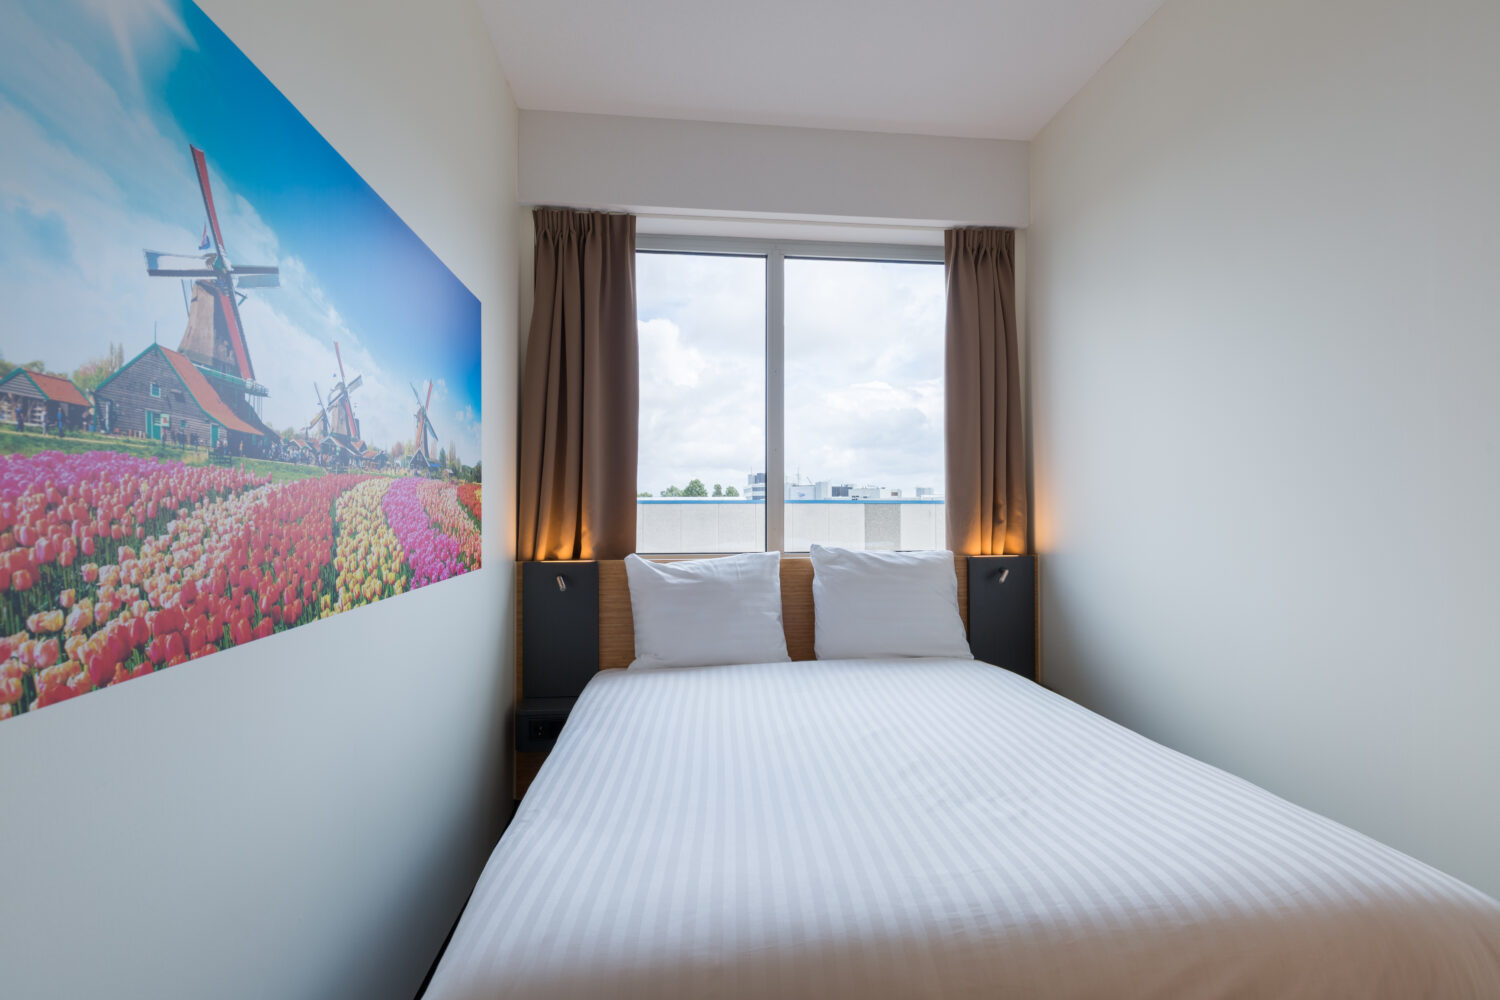 Small hotel room with a bed and picture of a flower field